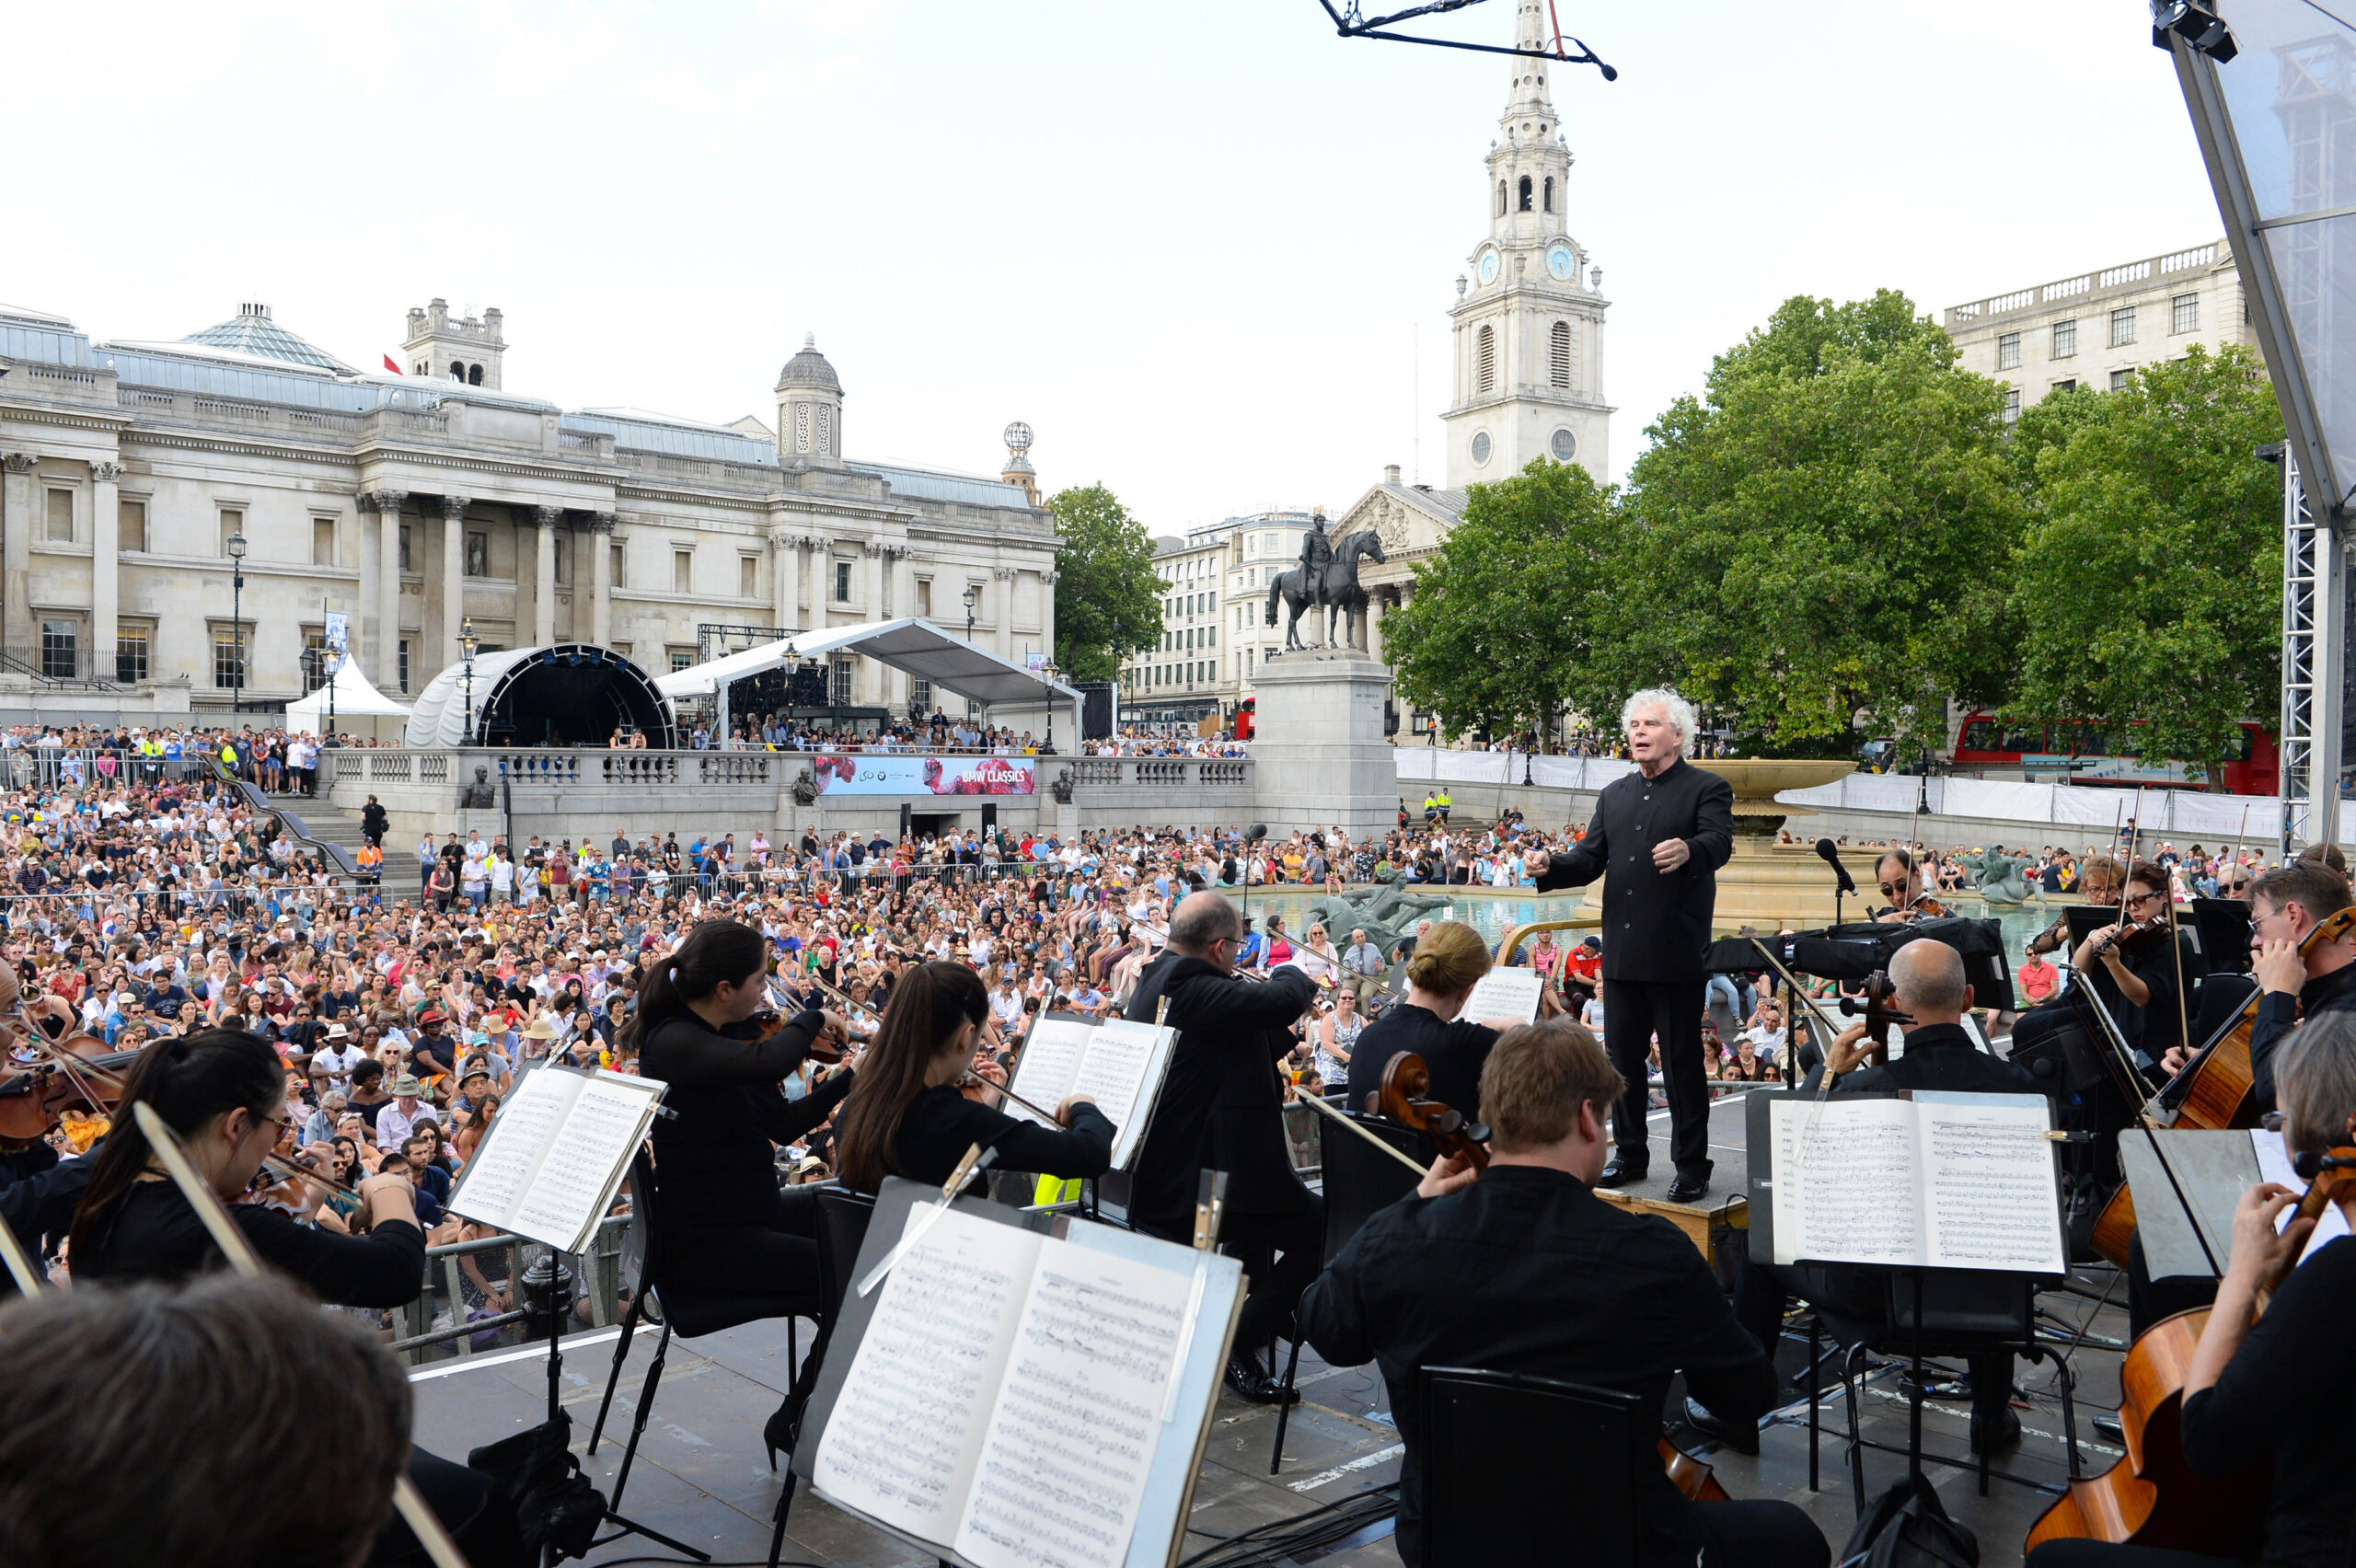 Conductor Sir Simon Rattle conducts the LSO in Trafalgar Square London